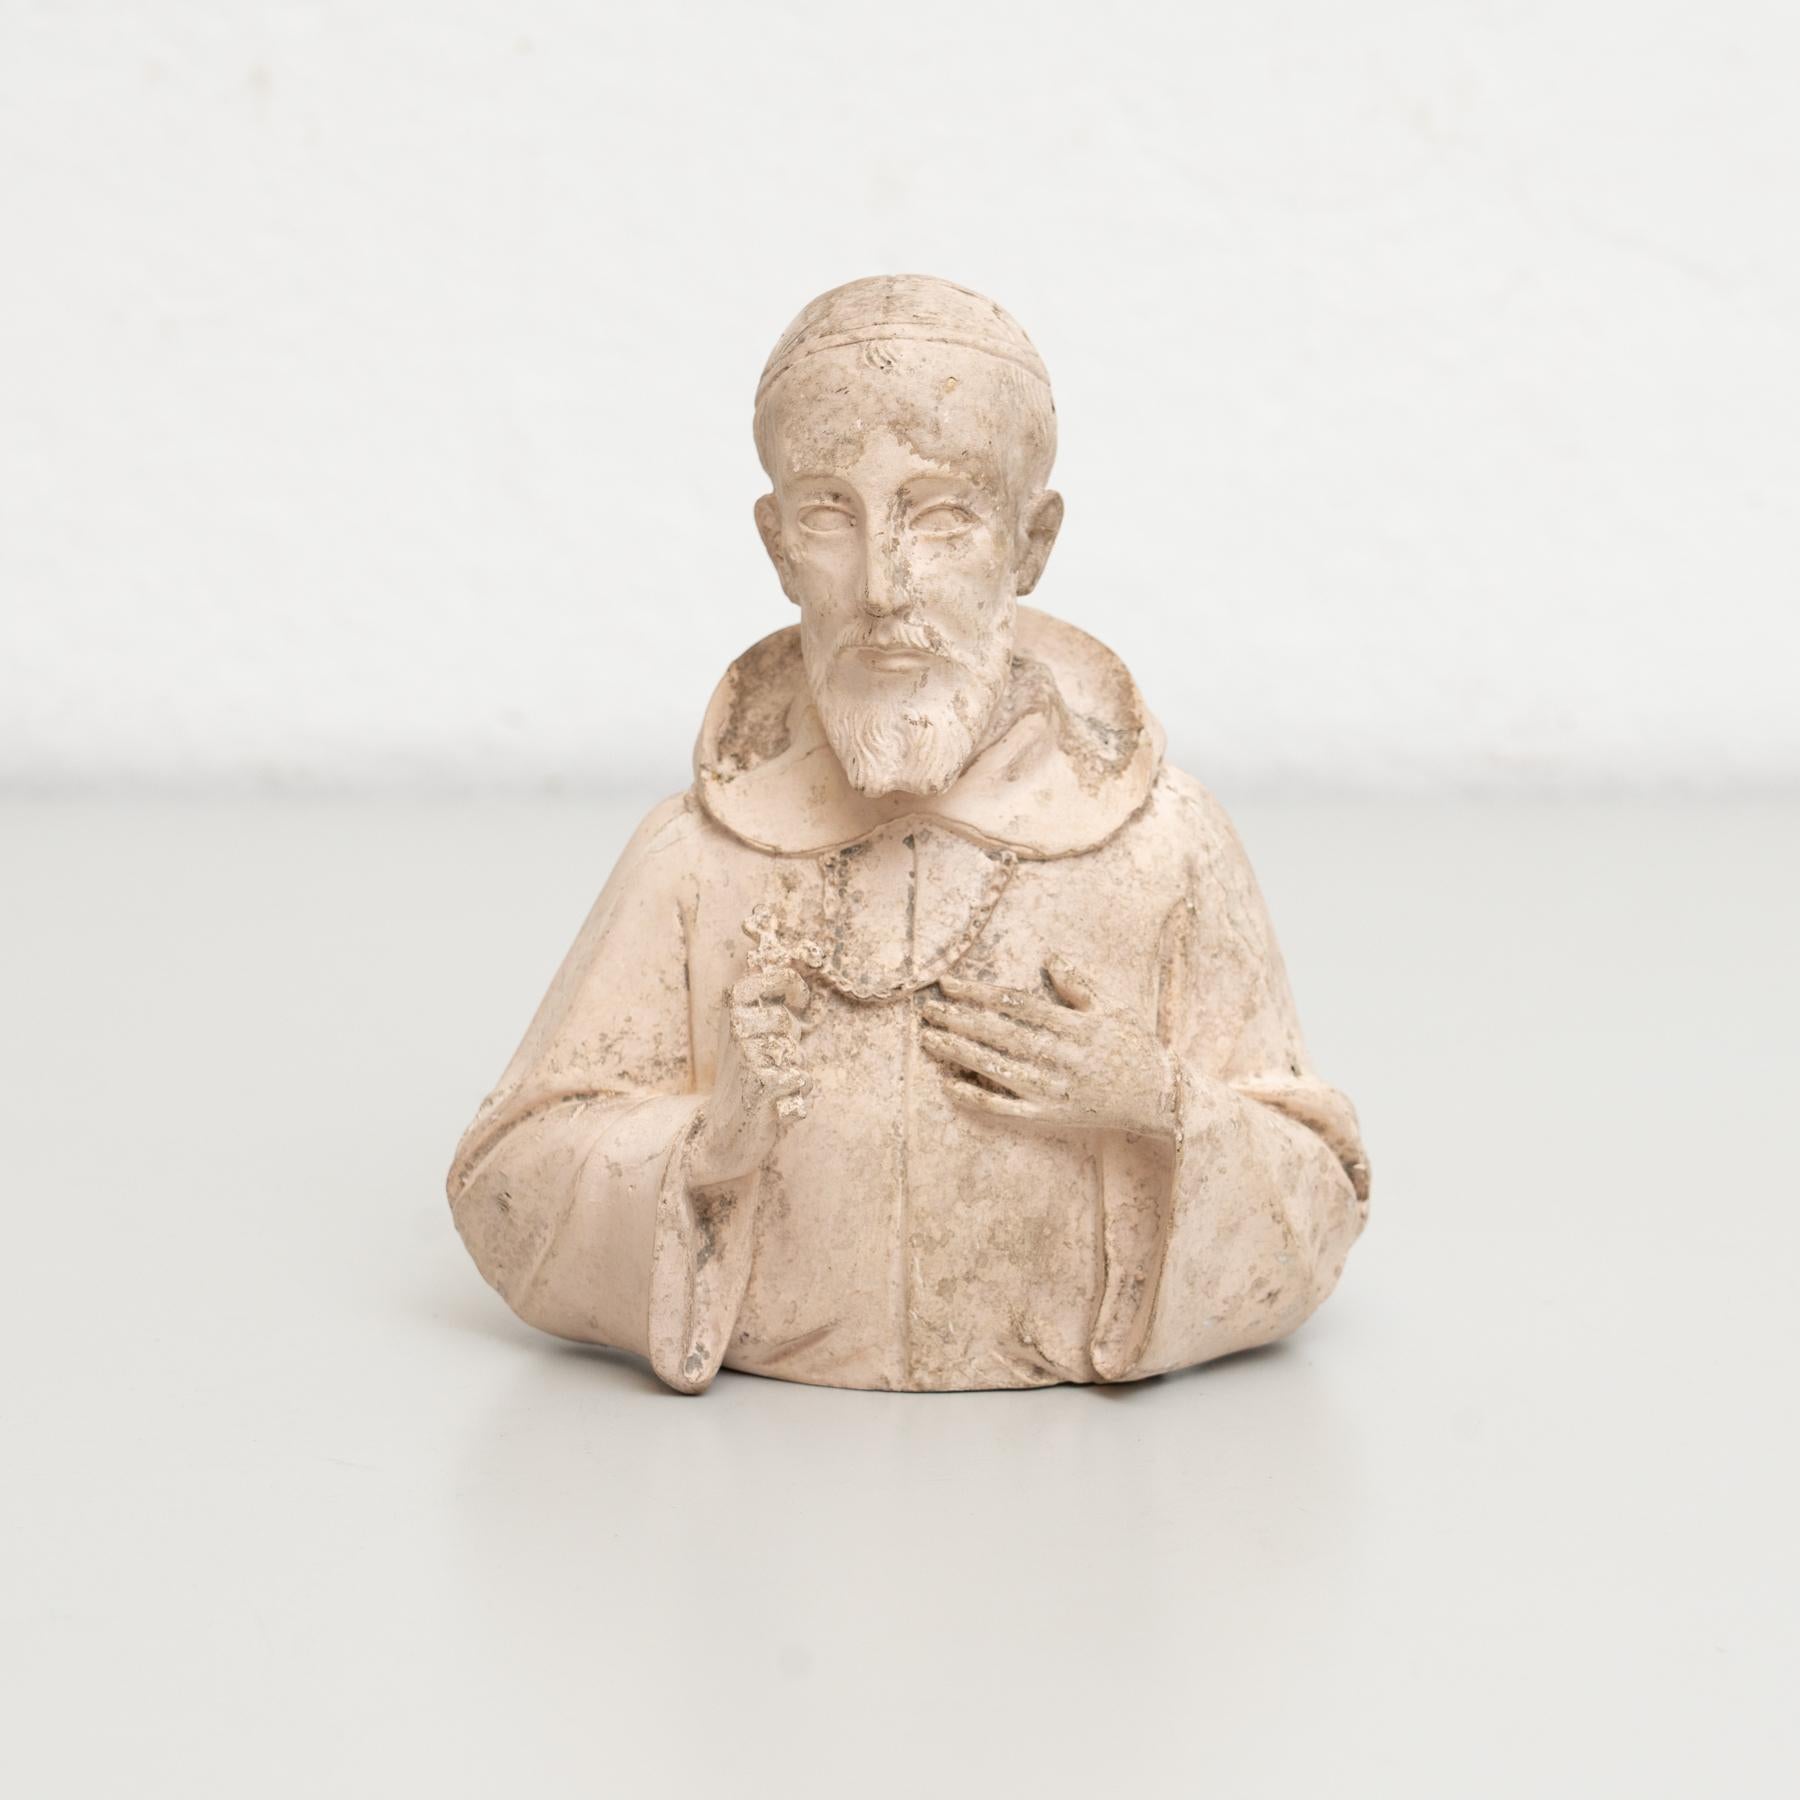 Traditional religious plaster figure of a saint.

Made in traditional Catalan atelier in Olot, Spain, circa 1950.

In original condition, with minor wear consistent with age and use, preserving a beautiful patina.

Materials:
Plaster.
  